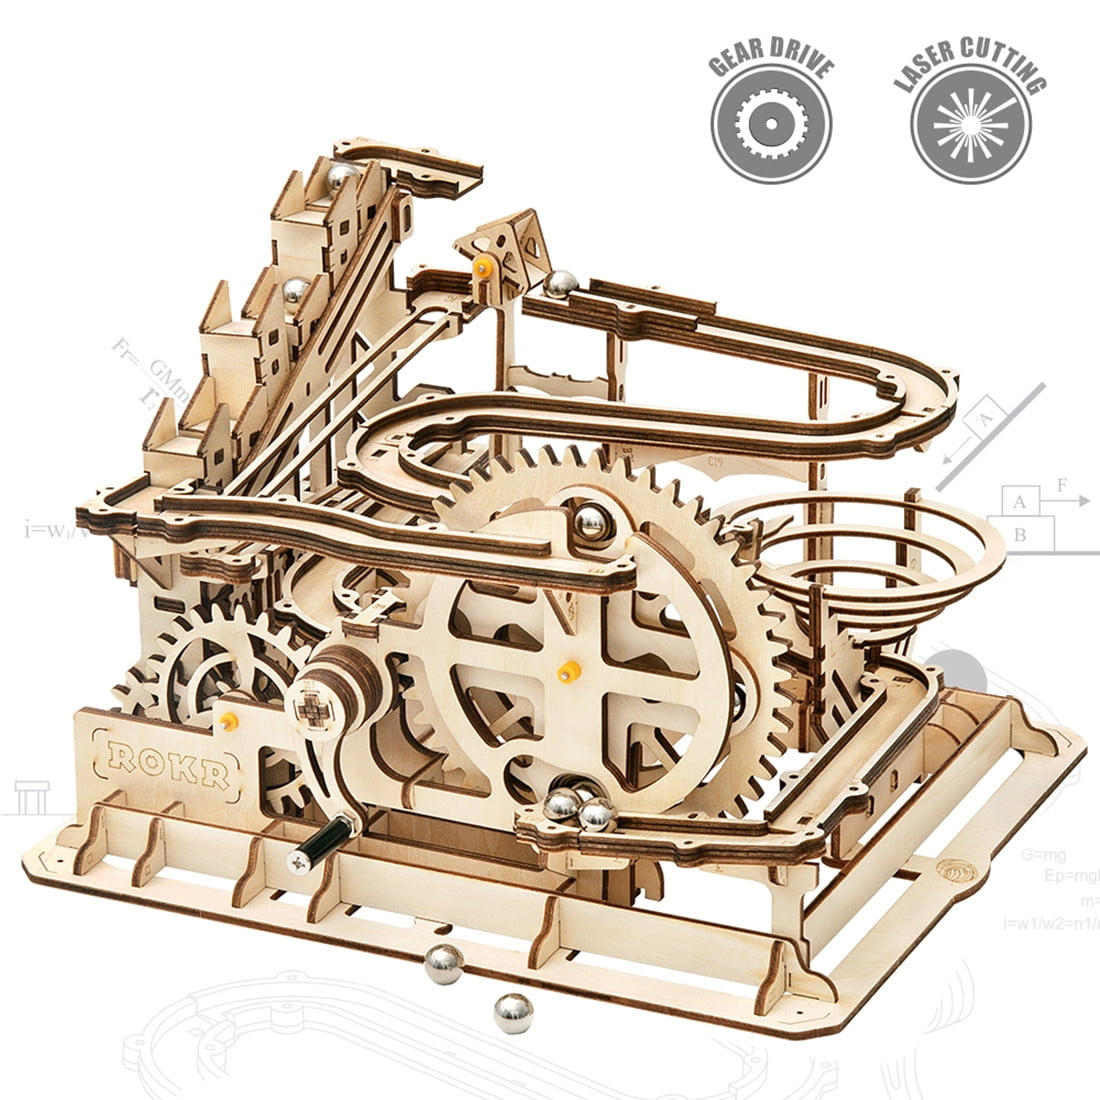 ROKR Marble Run Kit 3D Wooden Puzzles Model to Build for Adults Birthday  Gift 233 Pieces